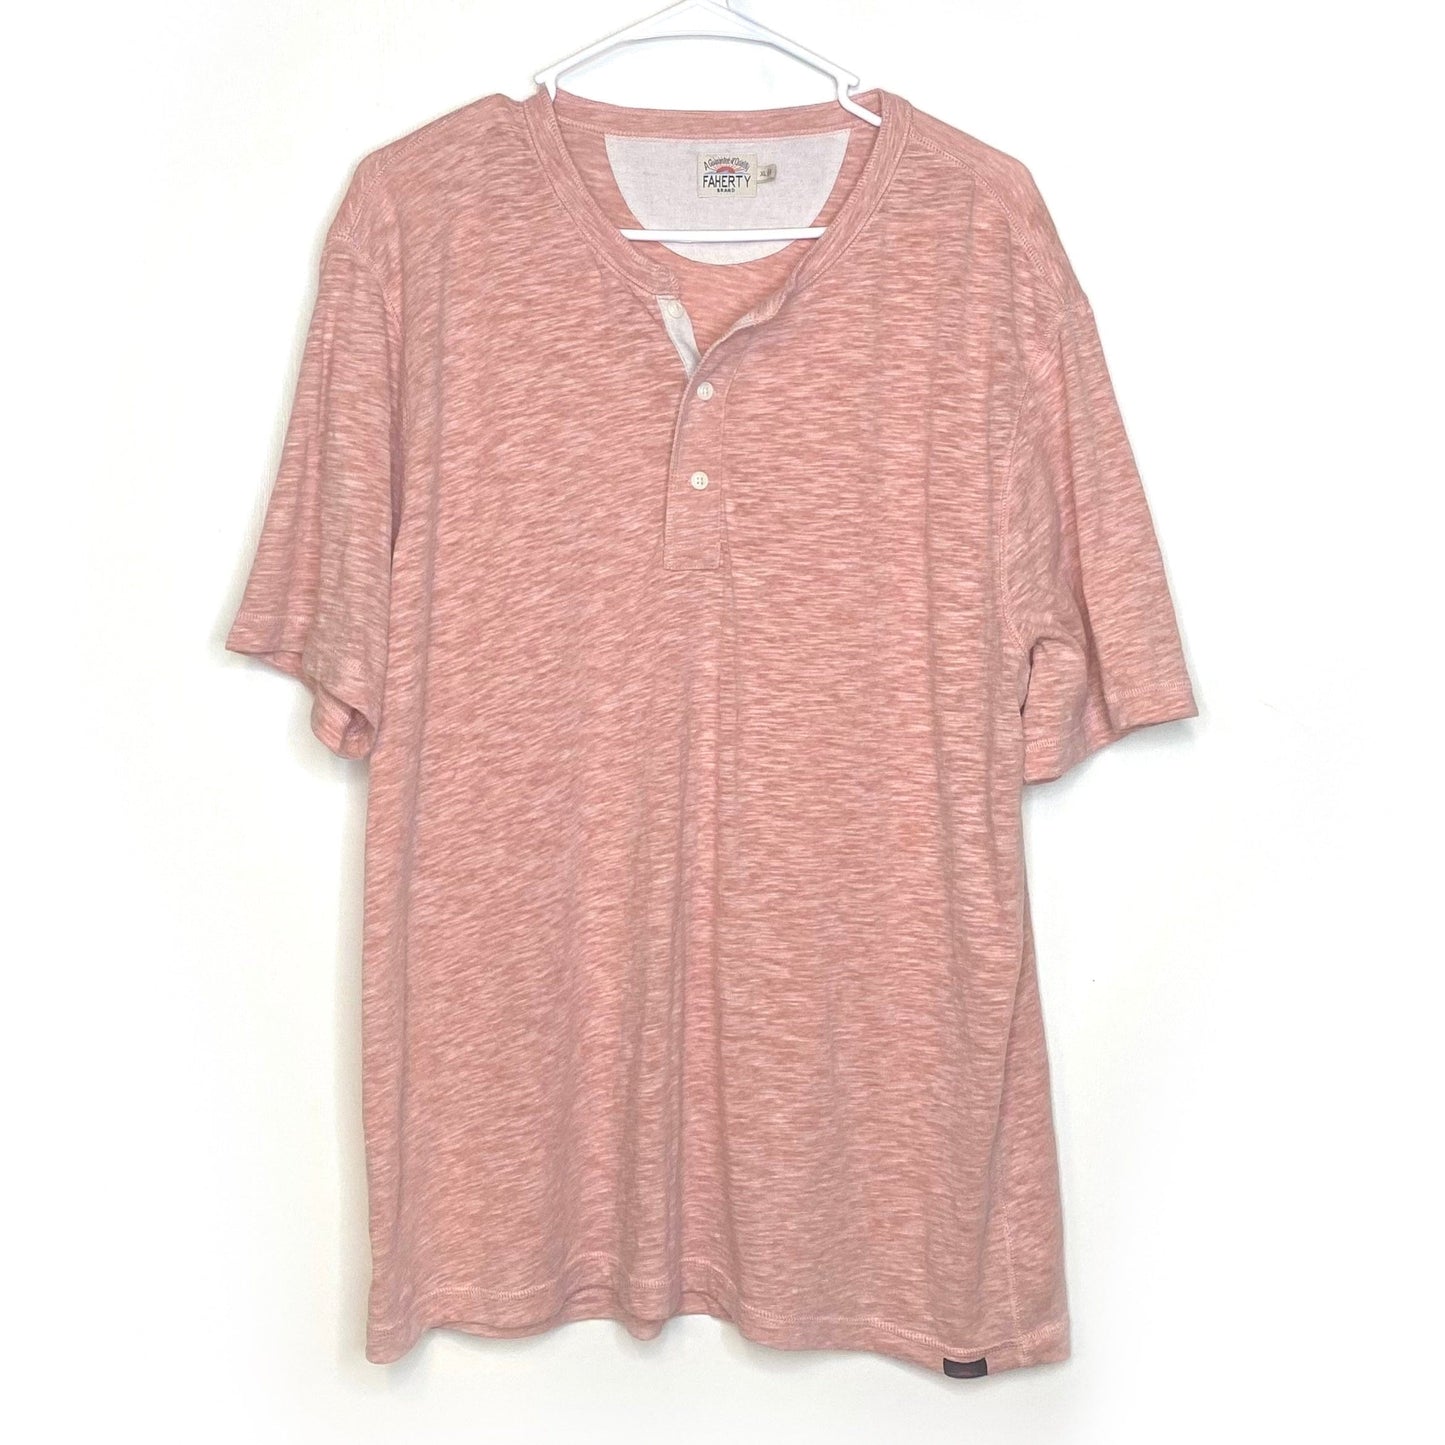 Faherty Mens Size XL Light Heather Peach Henley T-Shirt S/s Pre-Owned